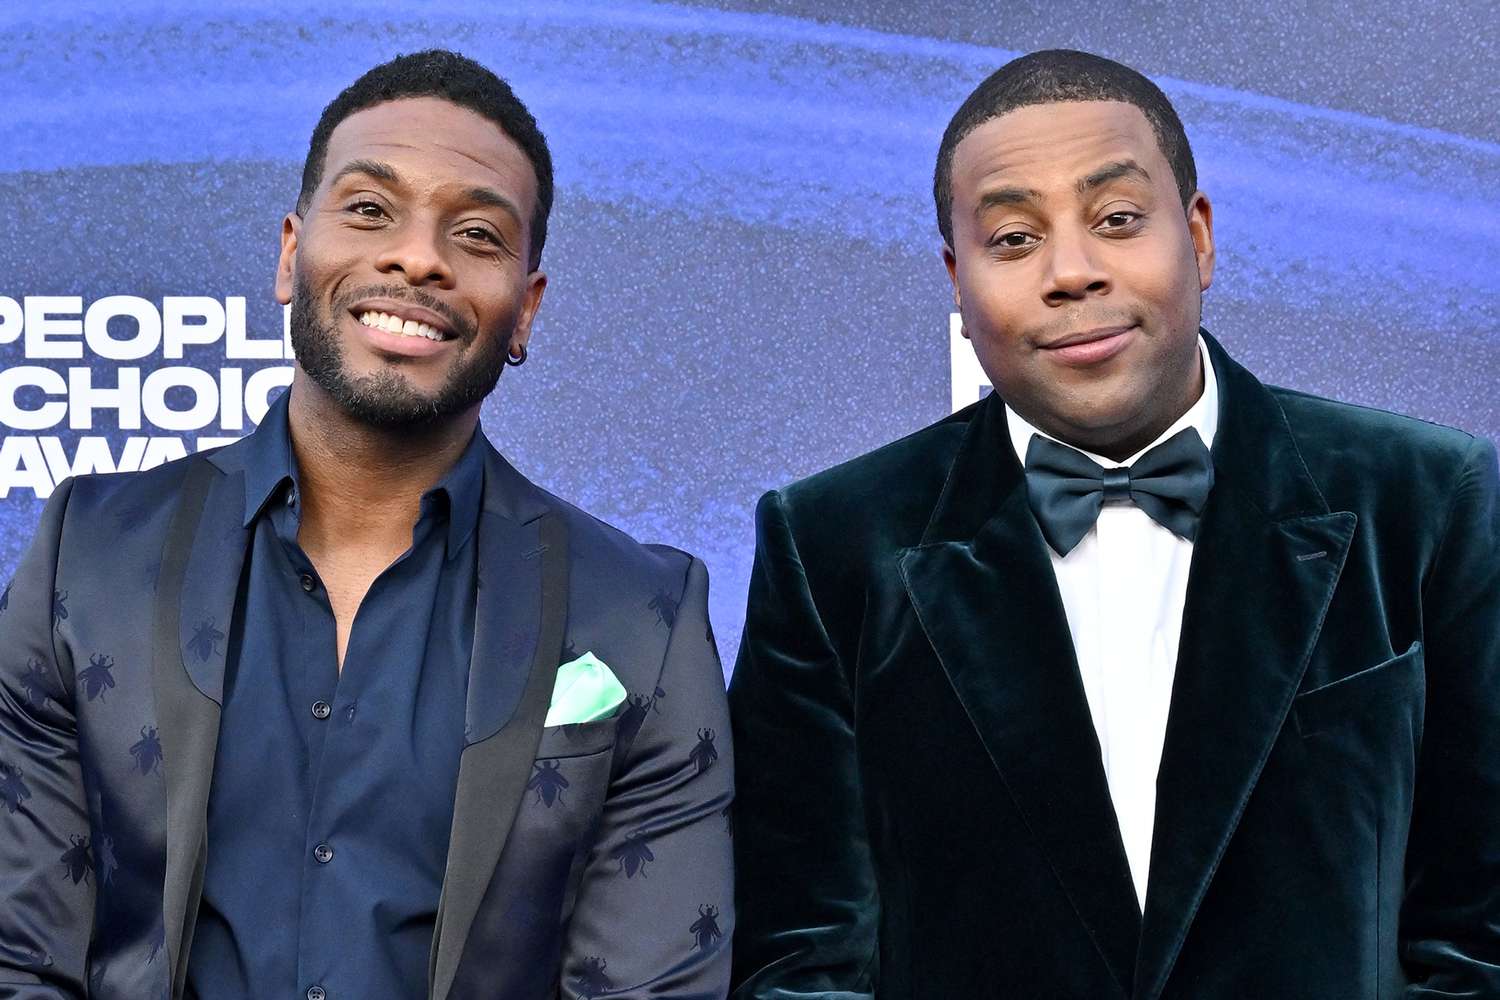 Kenan Thompson and Kel Mitchell reunite on 'Who Wants to Be a Millionaire'